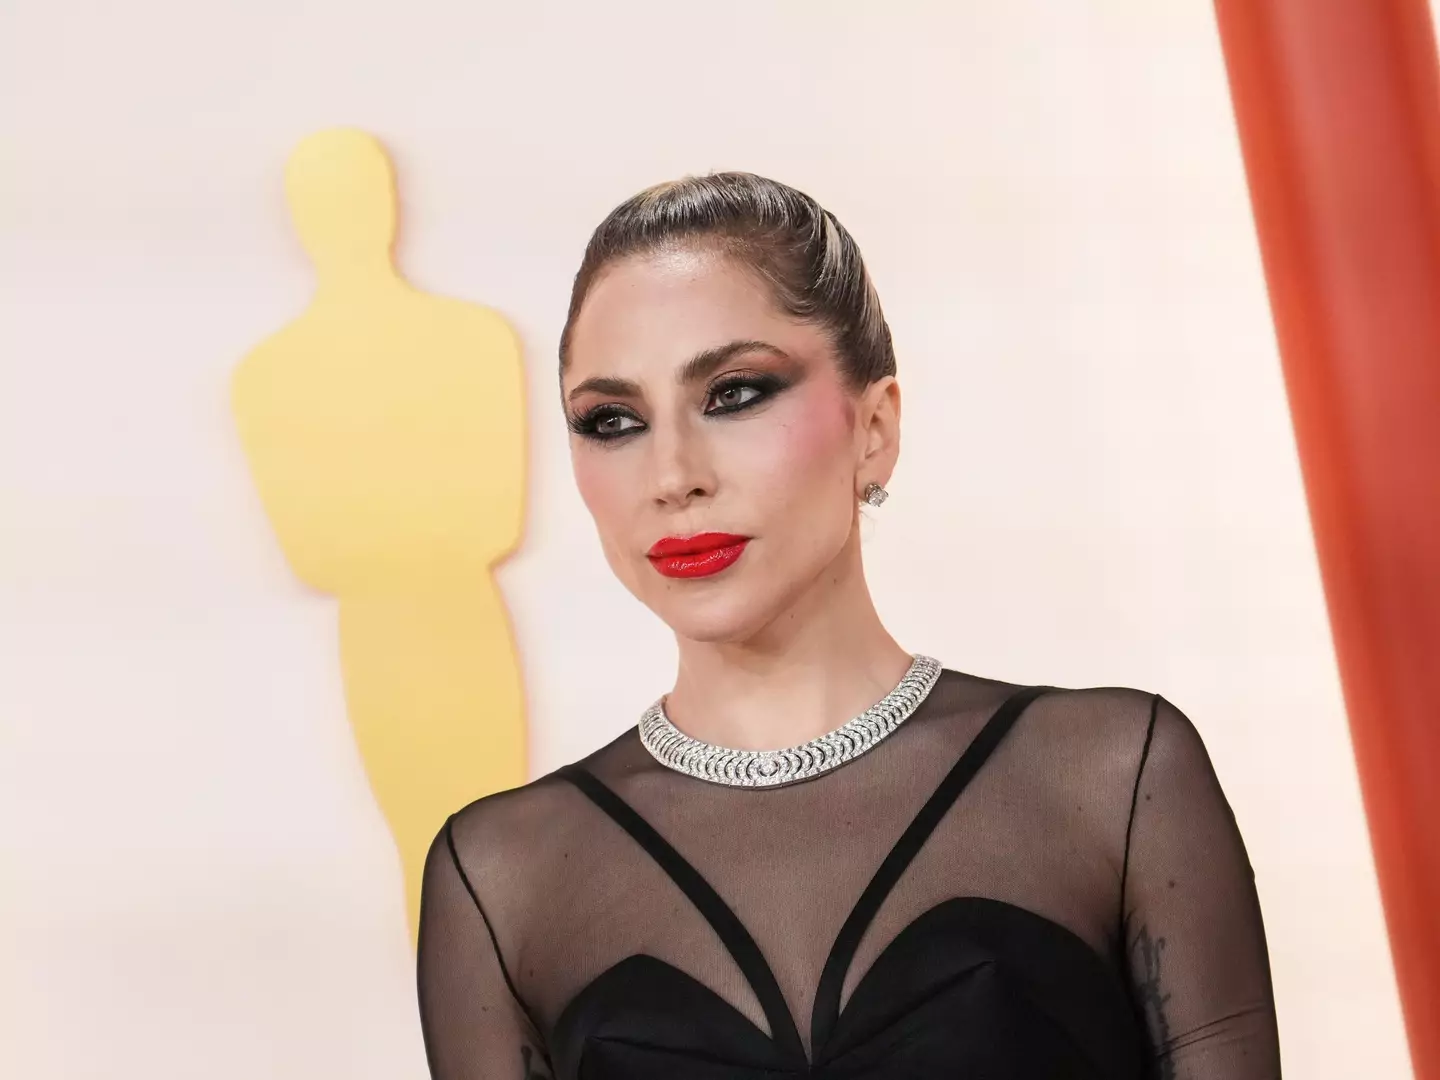 After her red carpet appearance, Lady Gaga changed her make-up and outfit completely.